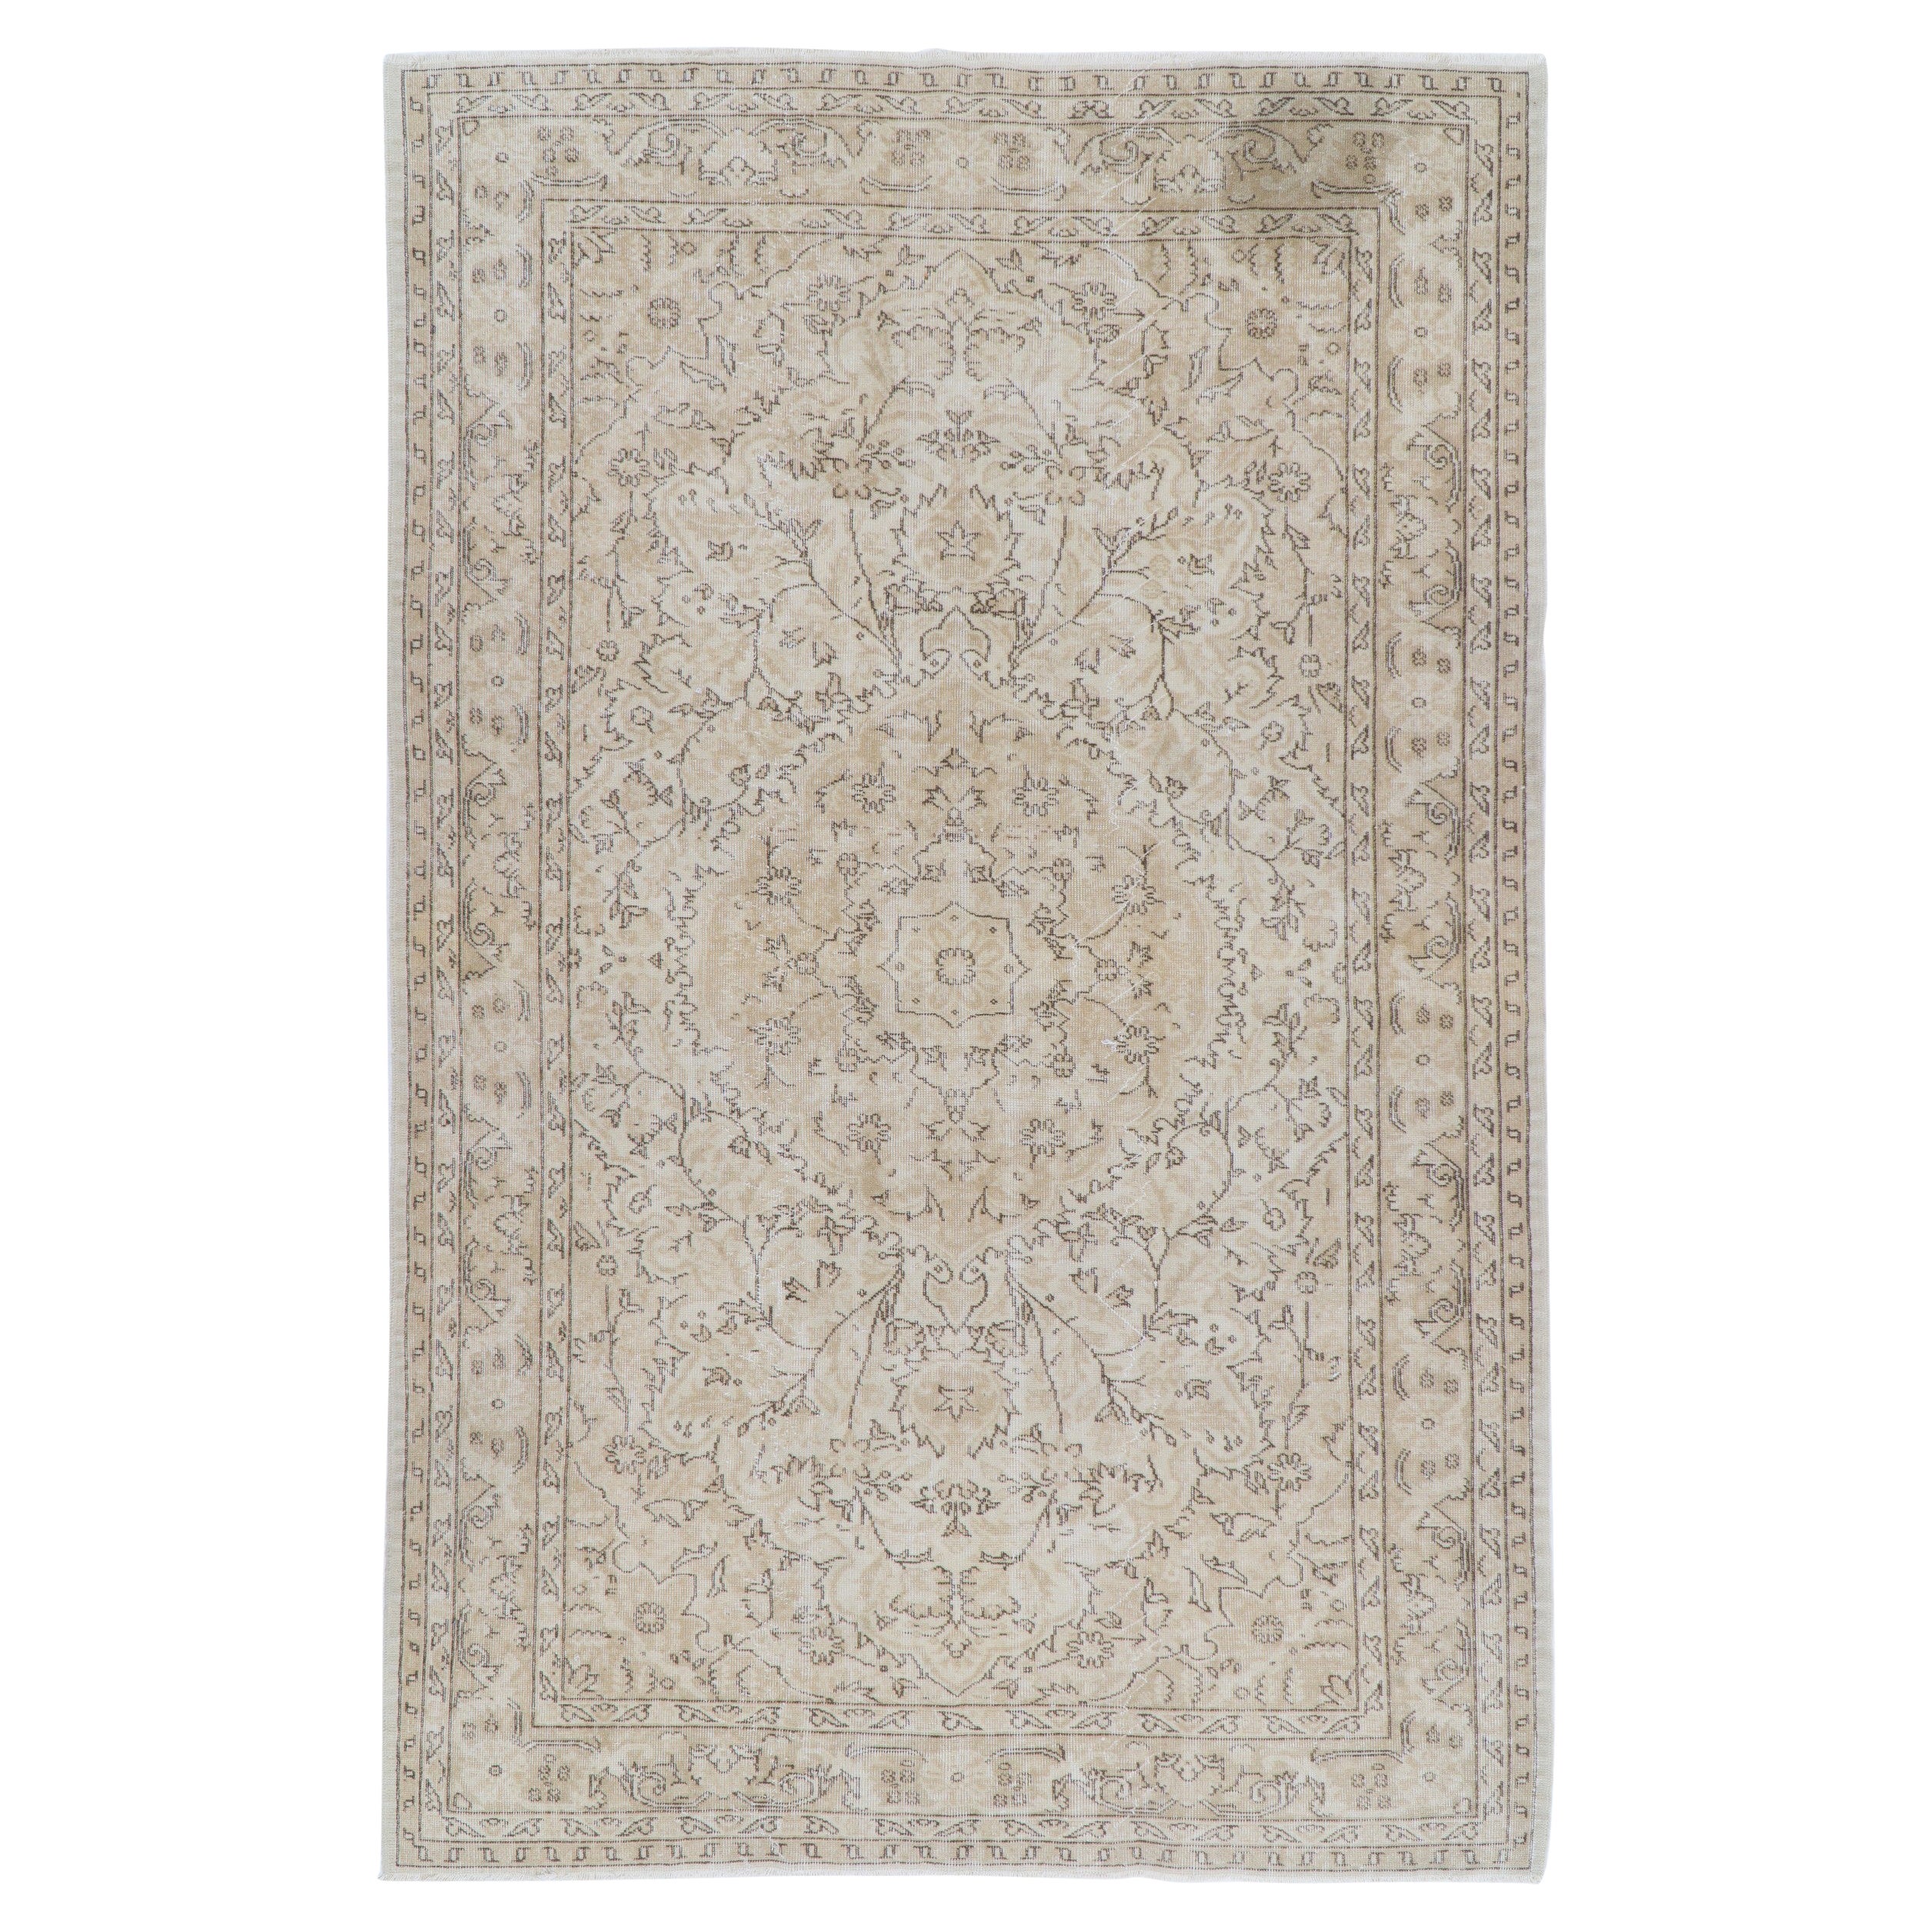 6.3x10 Ft Vintage Distressed Handmade Wool Anatolian Rug in Soft Neutral Colors For Sale